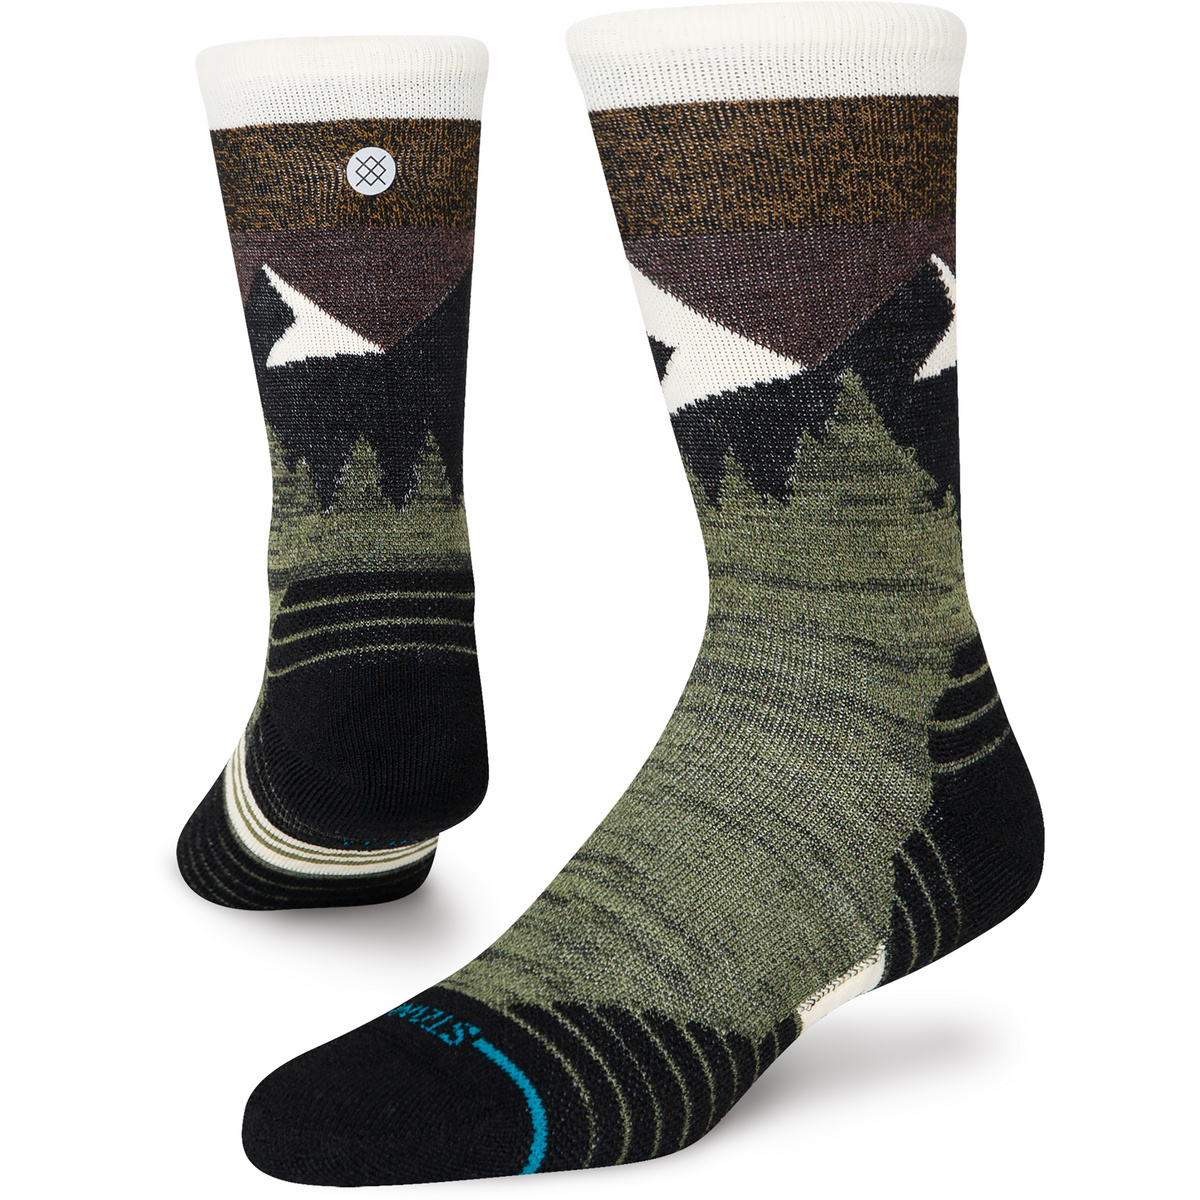 Image of Stance Calze Mid Wool Crew